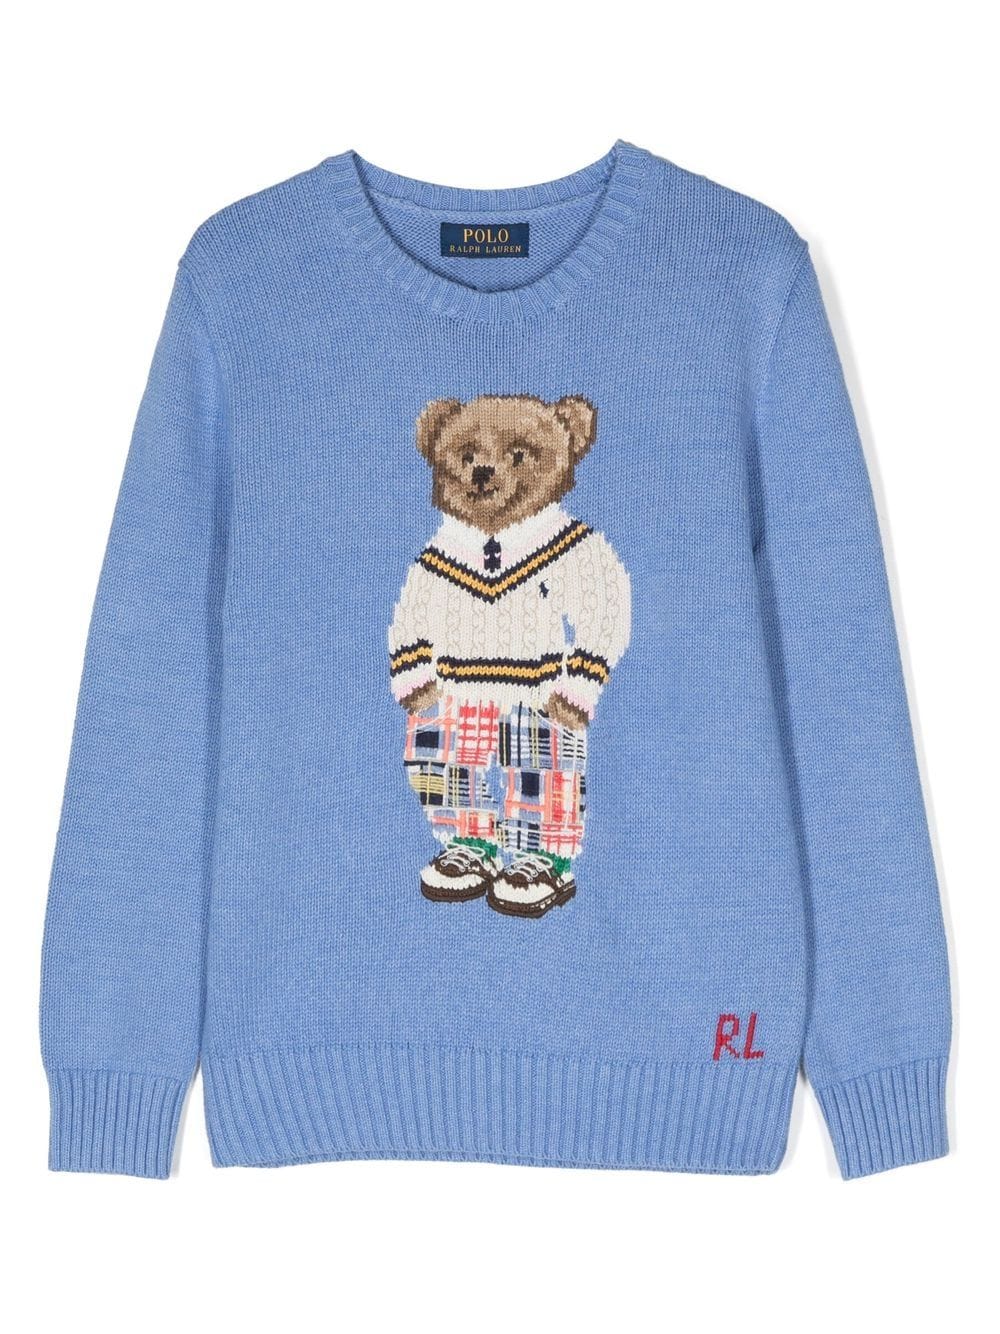 Roo Designs Child's Teddy Bear Pullover